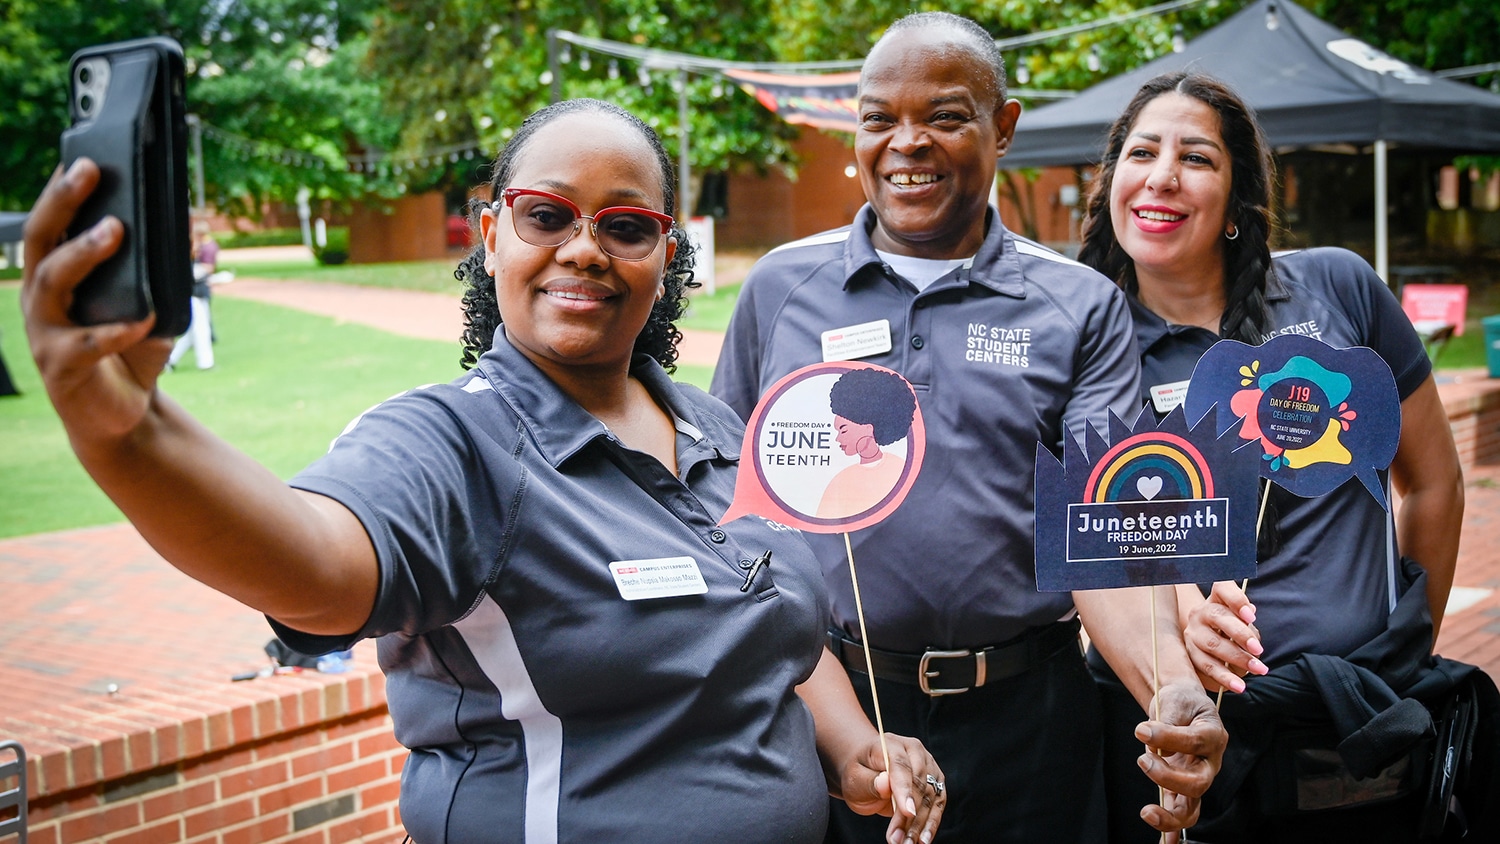 Three employees pose for a selfie at the inaugural Juneteenth celebration. They hold small, colorful Juneteenth signs.